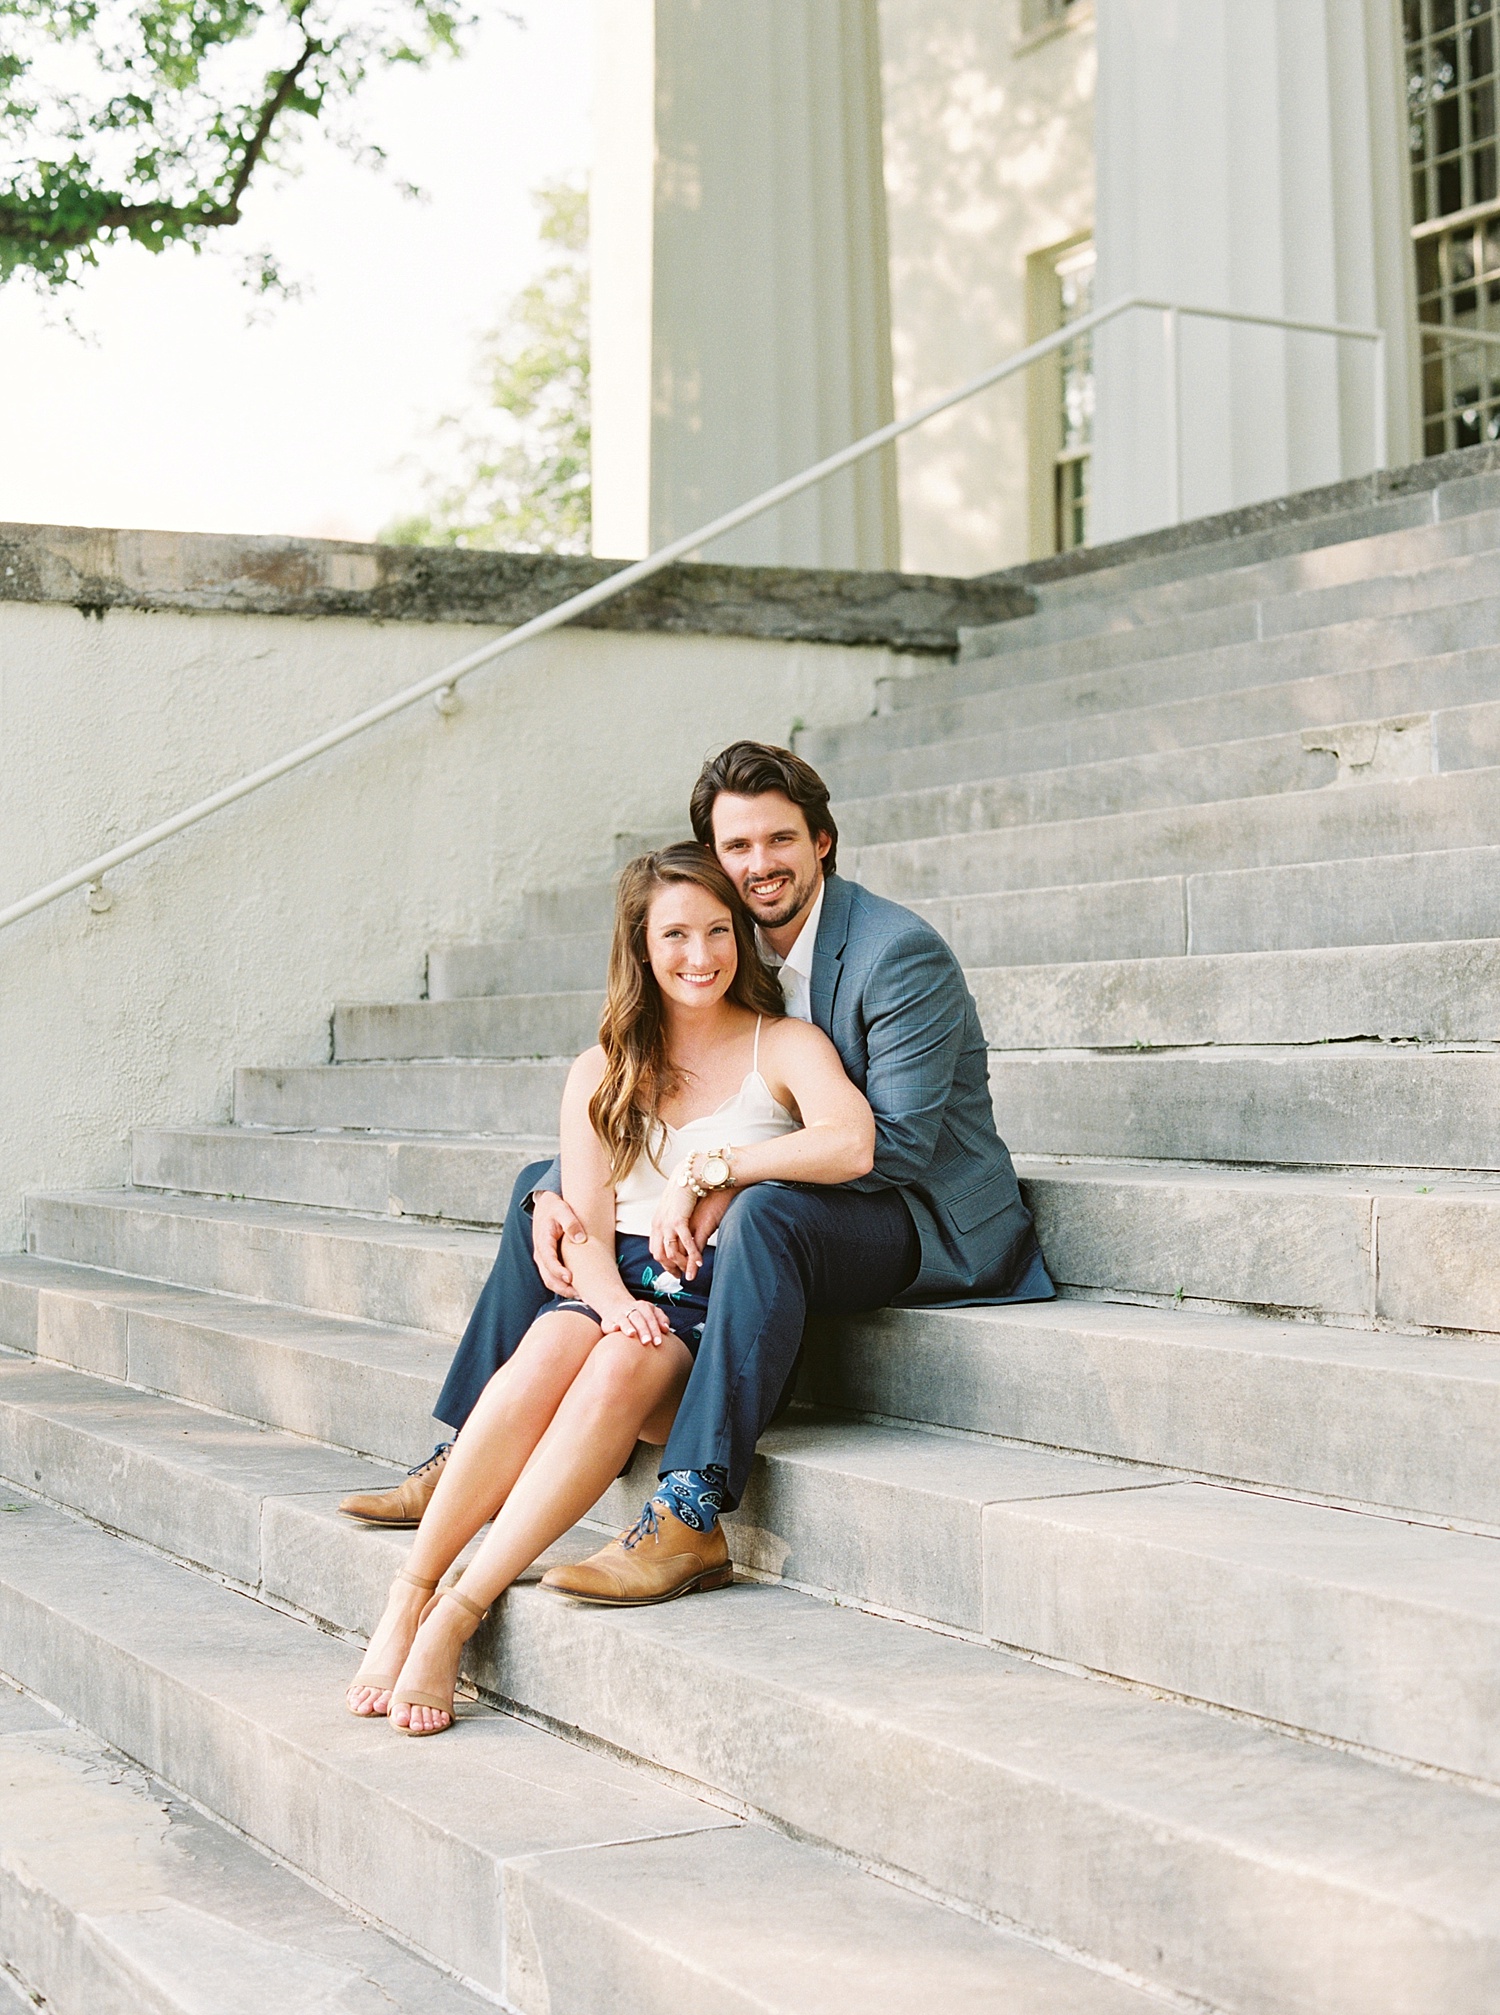 Downtown Lexington Engagement Session Talon Winery Picnic Engagement Session Gal Meets Glam Anthropologie Dress Laura Bodnar Photography Lexington Wedding Photographer Film Photography_0008-1.jpg